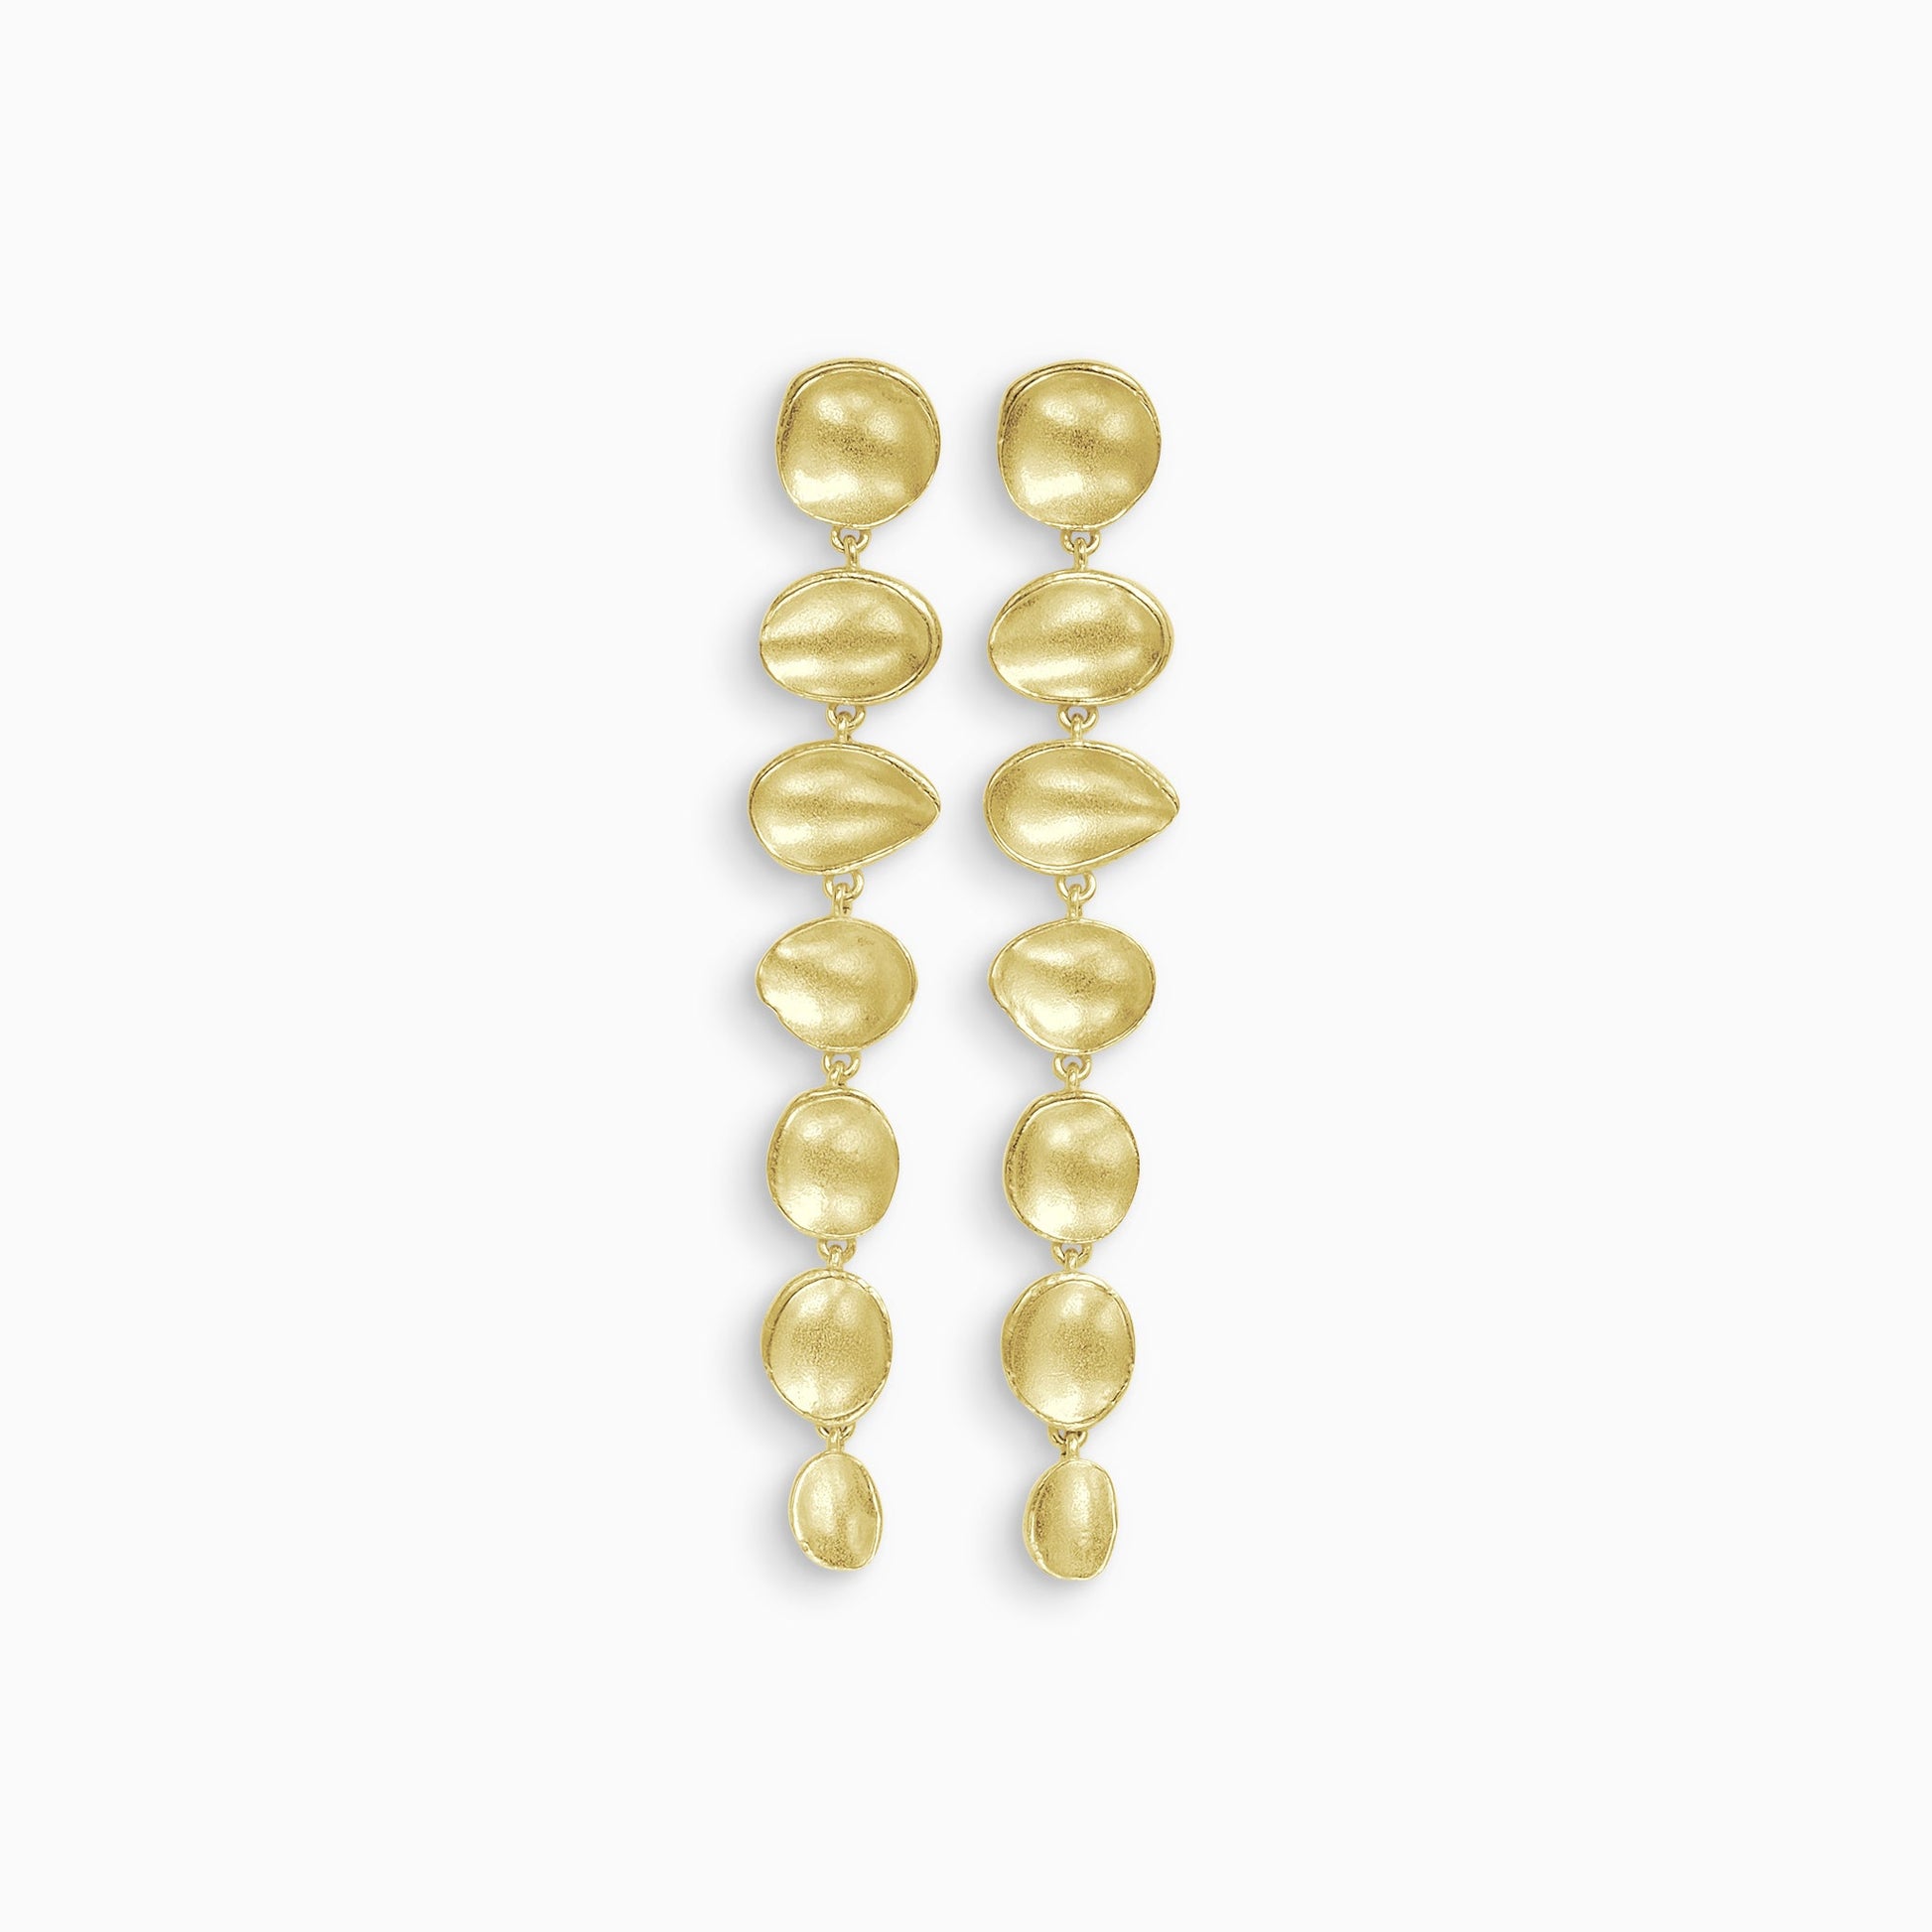 A pair of 18ct Fairtrade yellow gold drop earrings. A line of 7 articulating concave discs of various organic shapes and sizes with a stud ear fastening on the top disc. Satin finish. 70mm length, 10mm width.